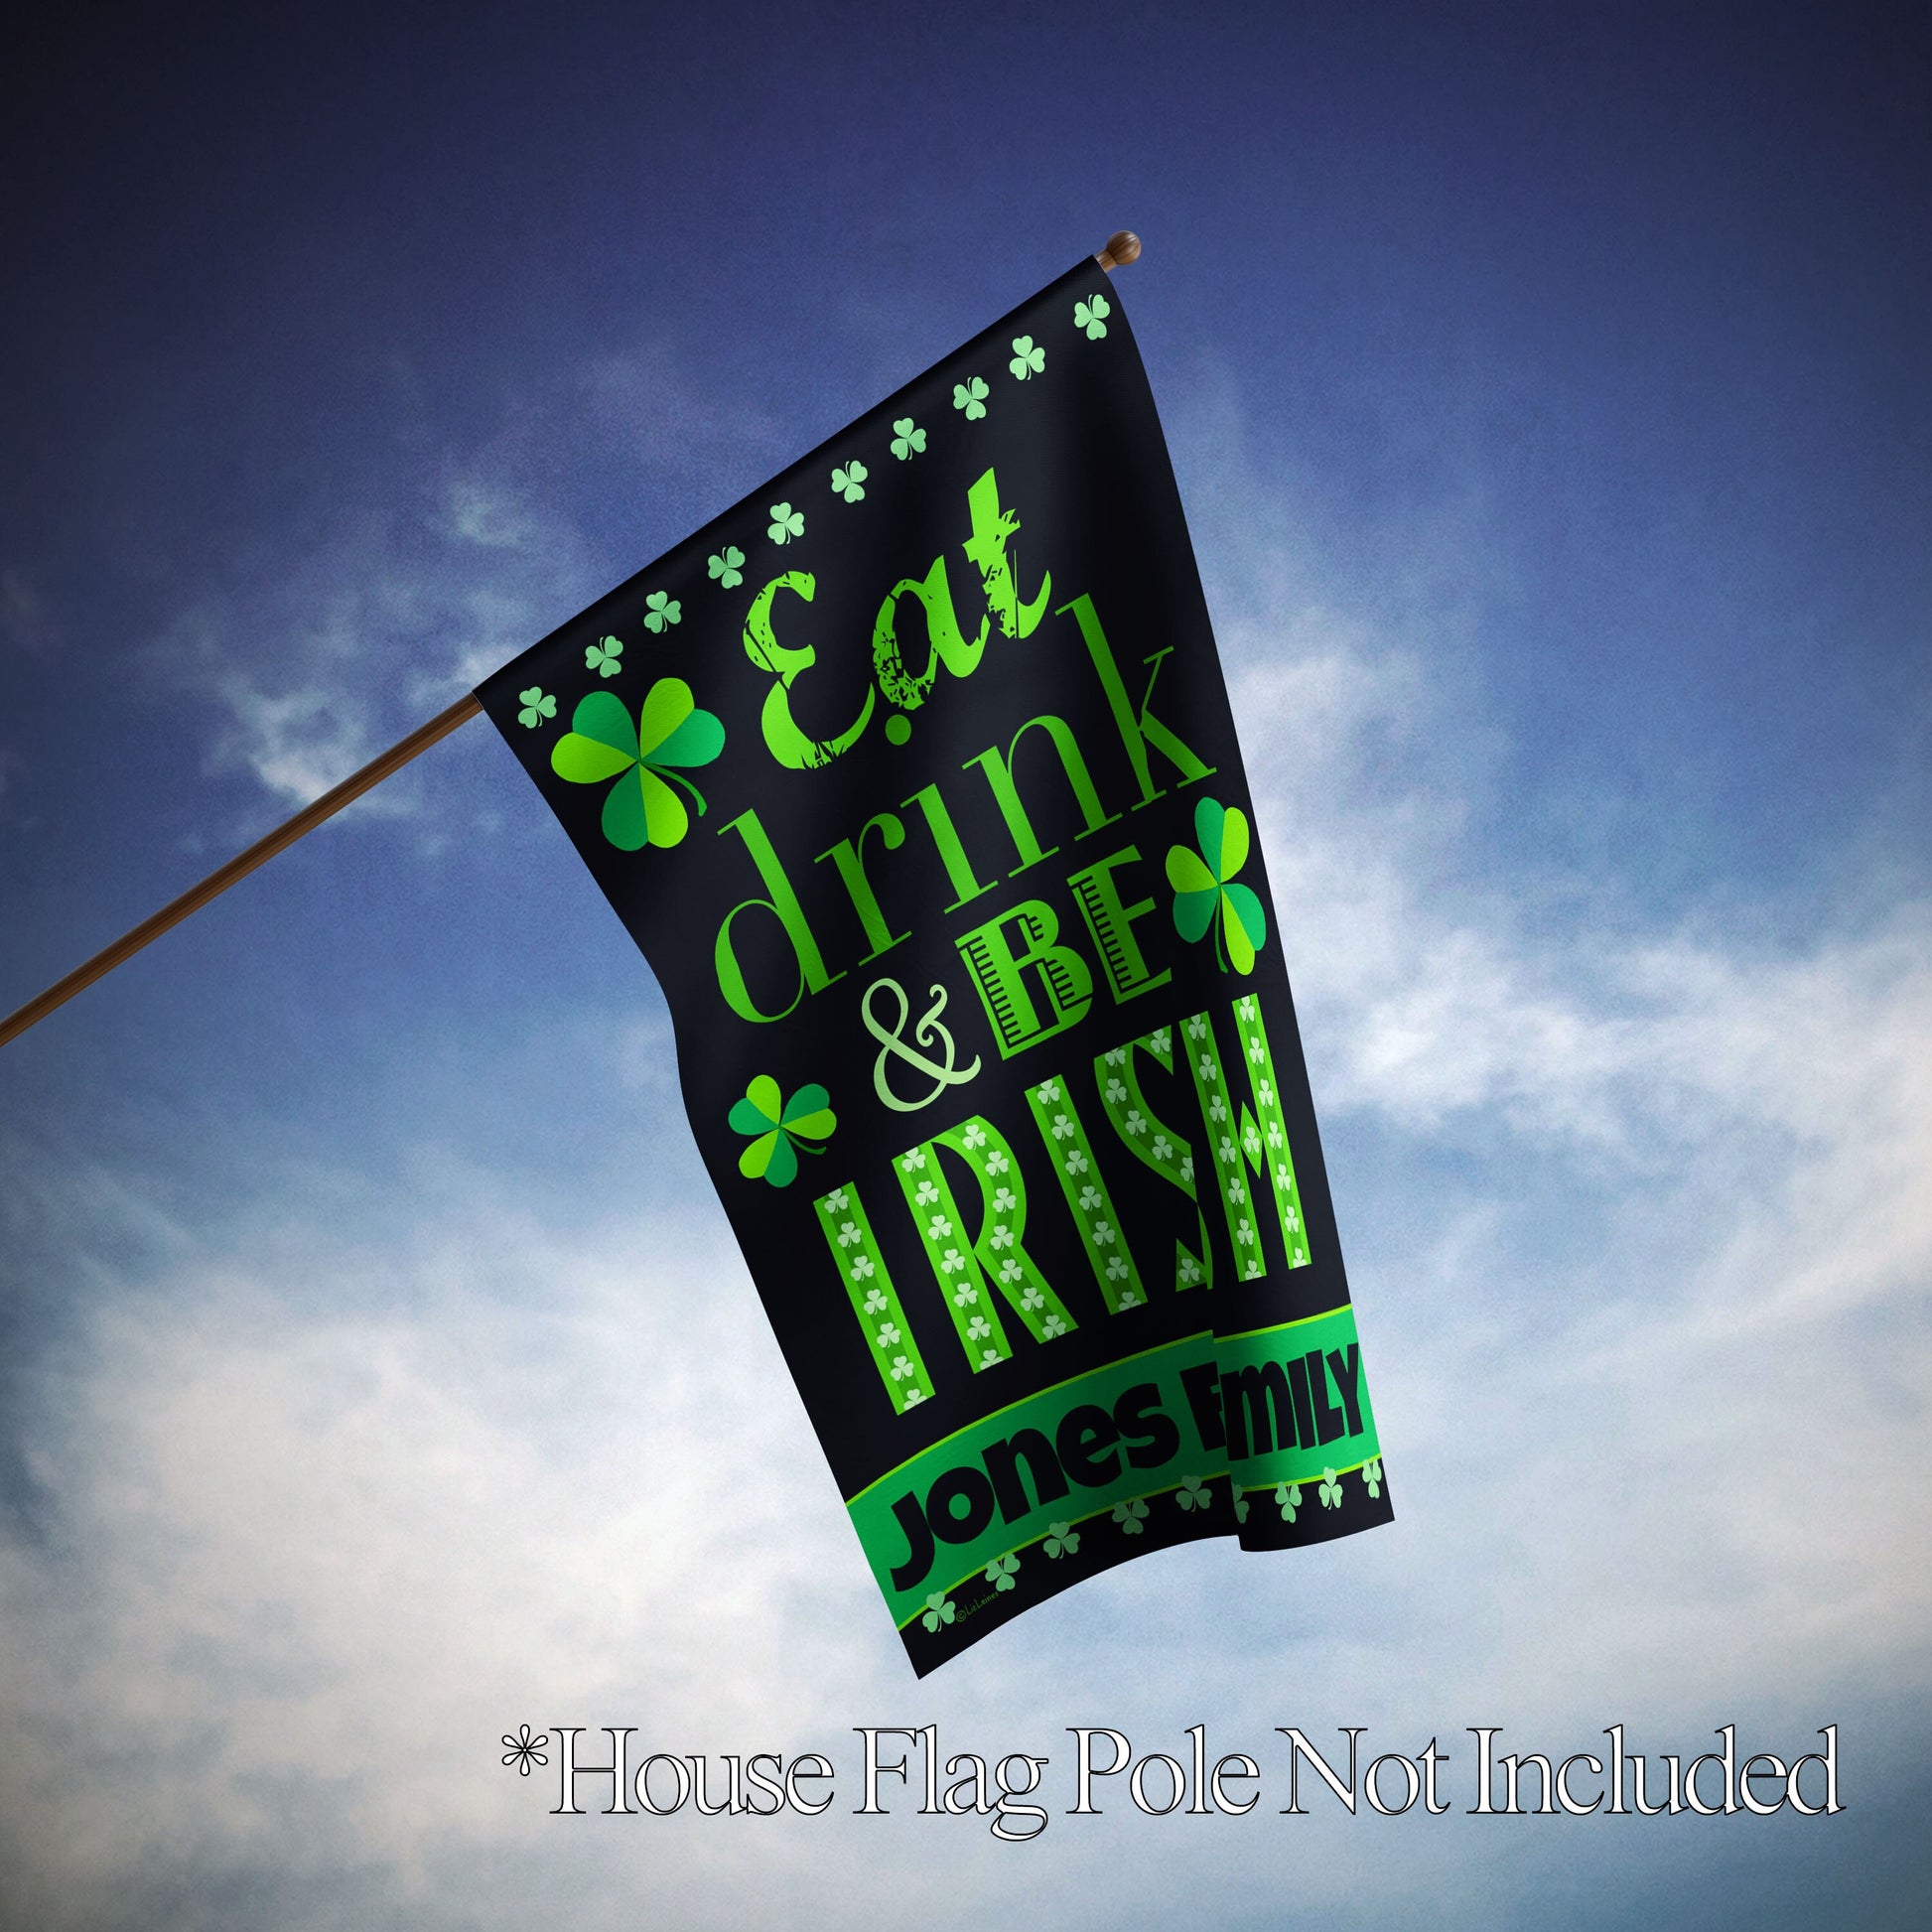 St. Patrick's Day Eat Drink And Be Irish Personalized House Flag - St. Patrick's Day Garden Flag - St. Patrick's Day Decorative Flags